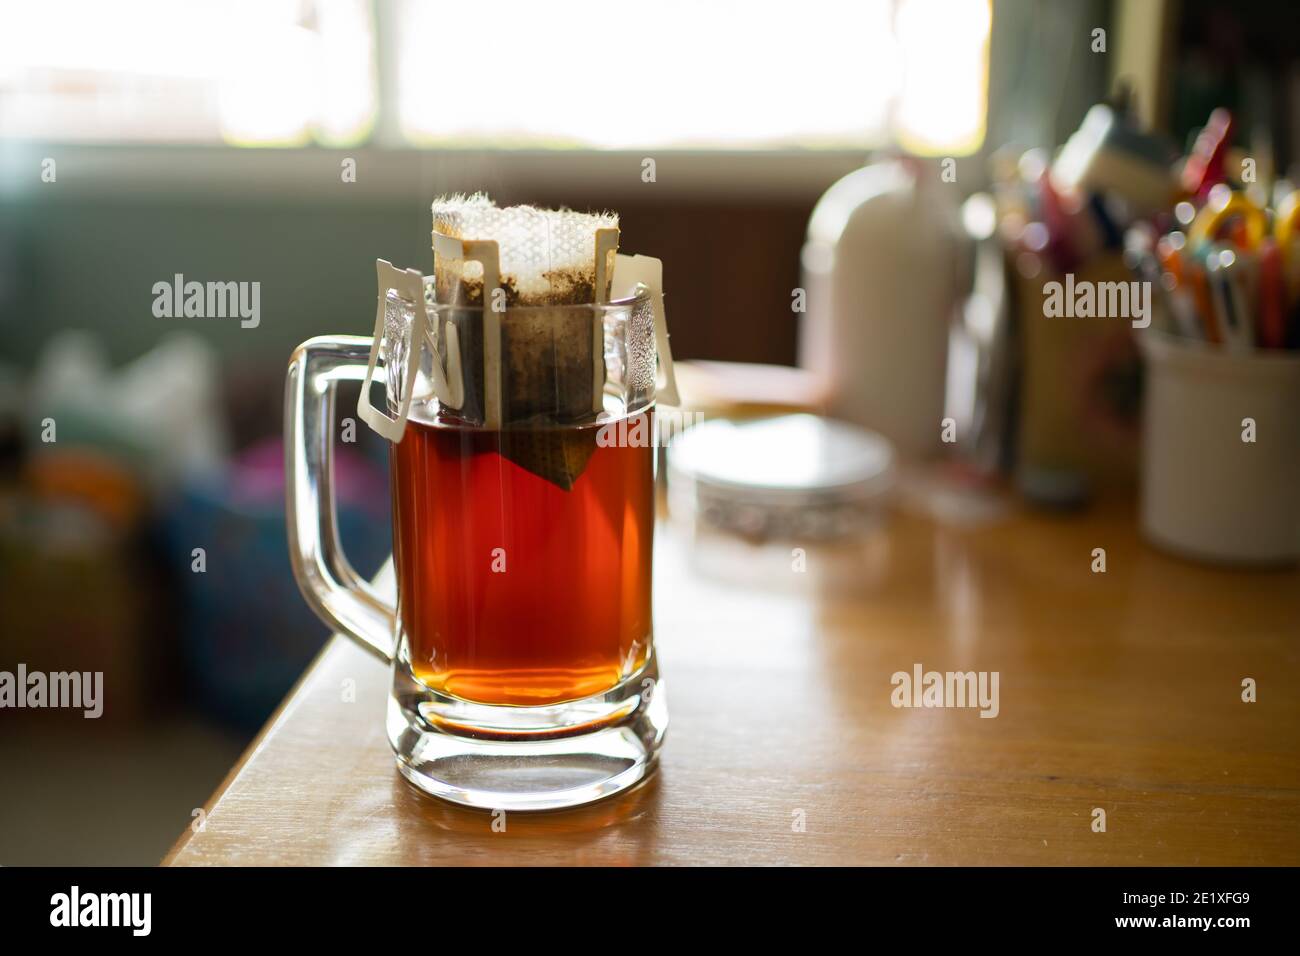 Making pour over coffee in a beer mug at home Stock Photo